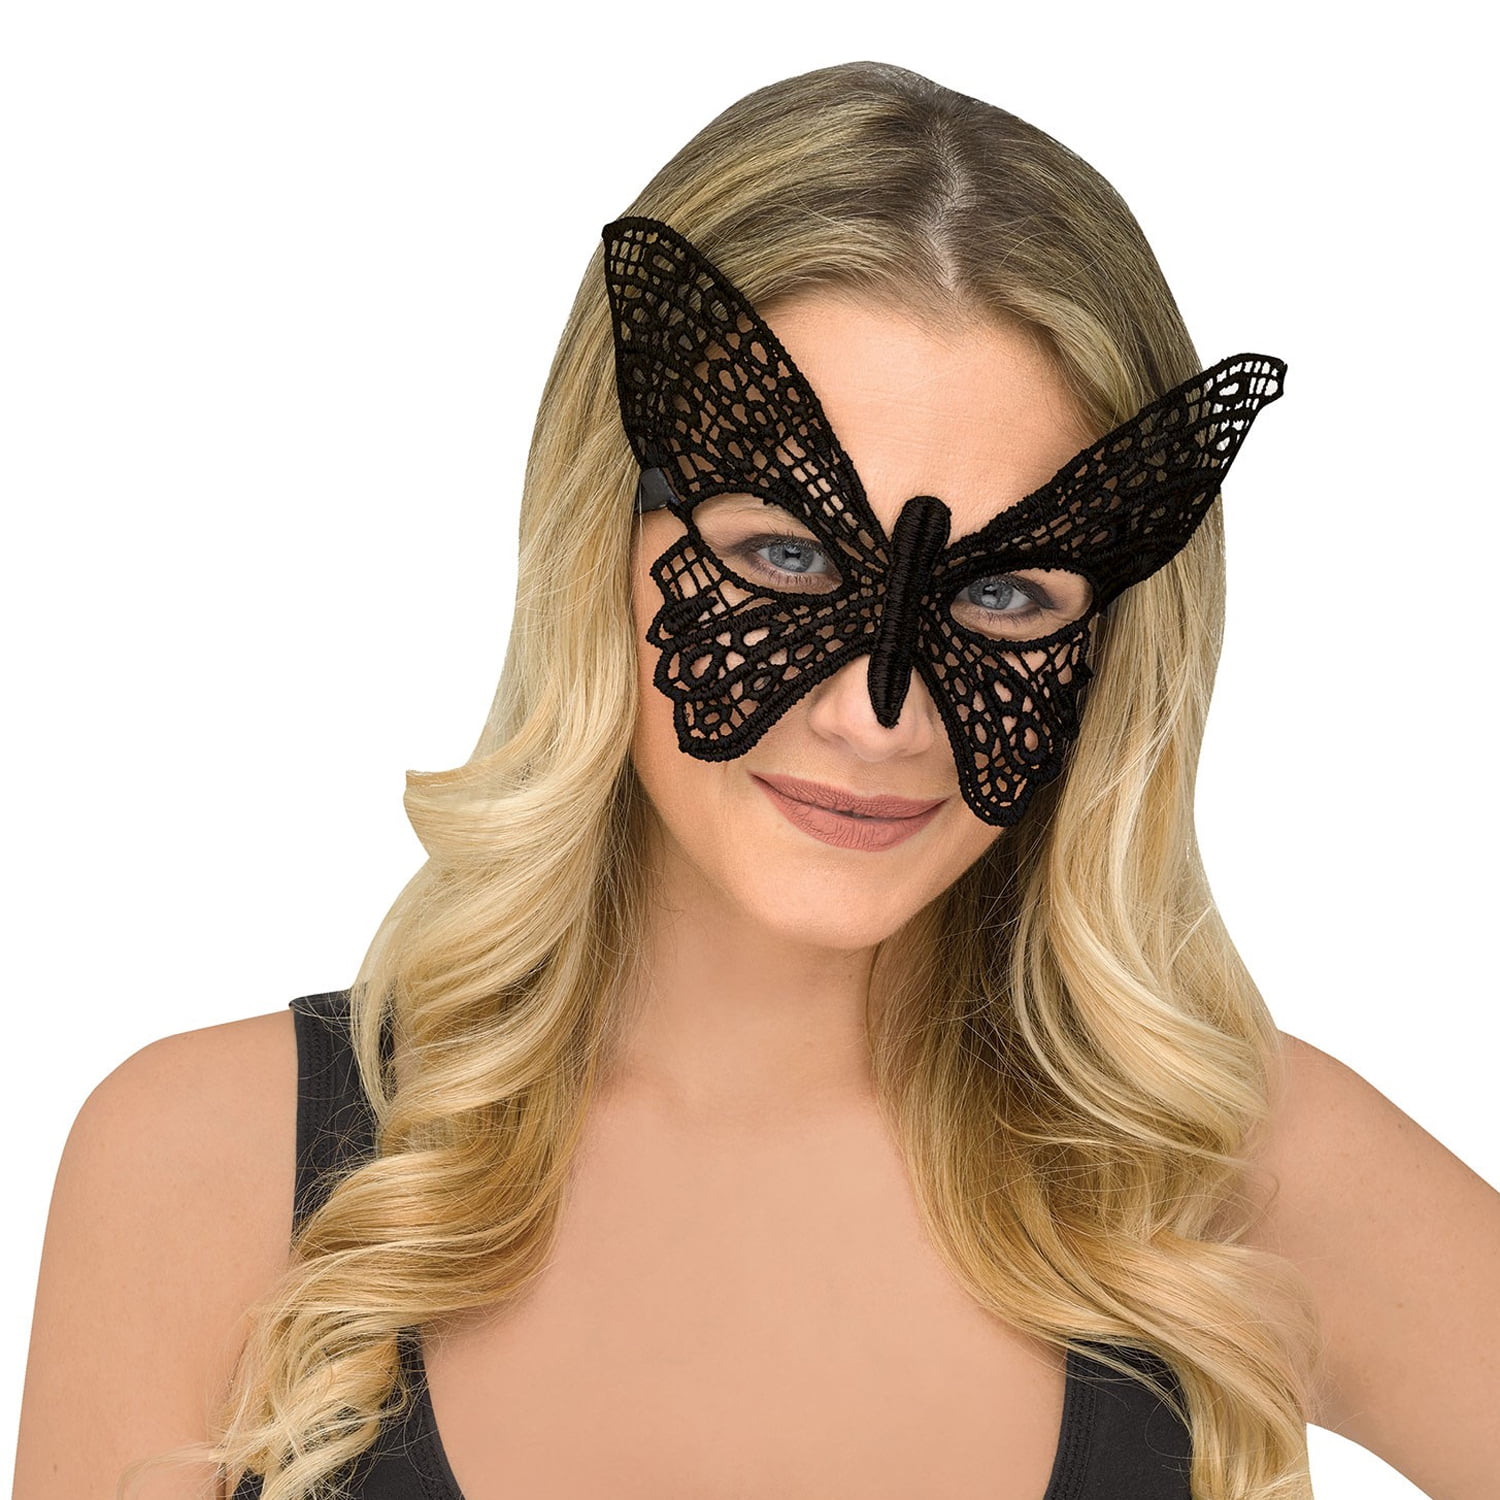 Mask dance Halloween party butterfly lace blindfold taste role mask Adornment 